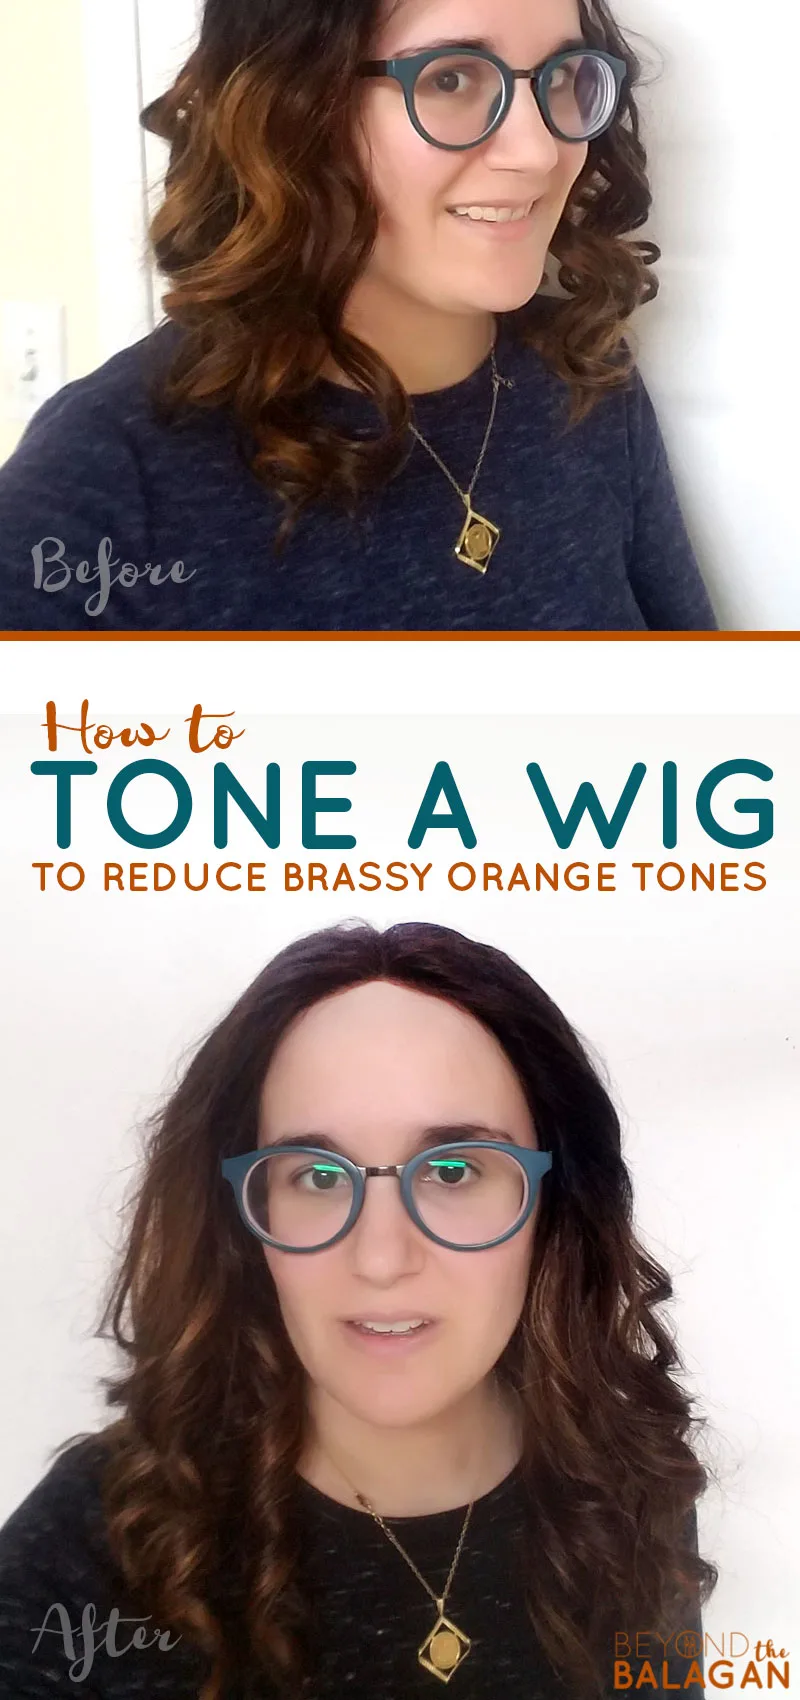 Click to learn how to tone a wig to reduce the brassy orange tones! These tips for wearing and styling a lace wig or sheitel will help you care for it on your own! #wigs #jewishfashion #beauty #lacewig